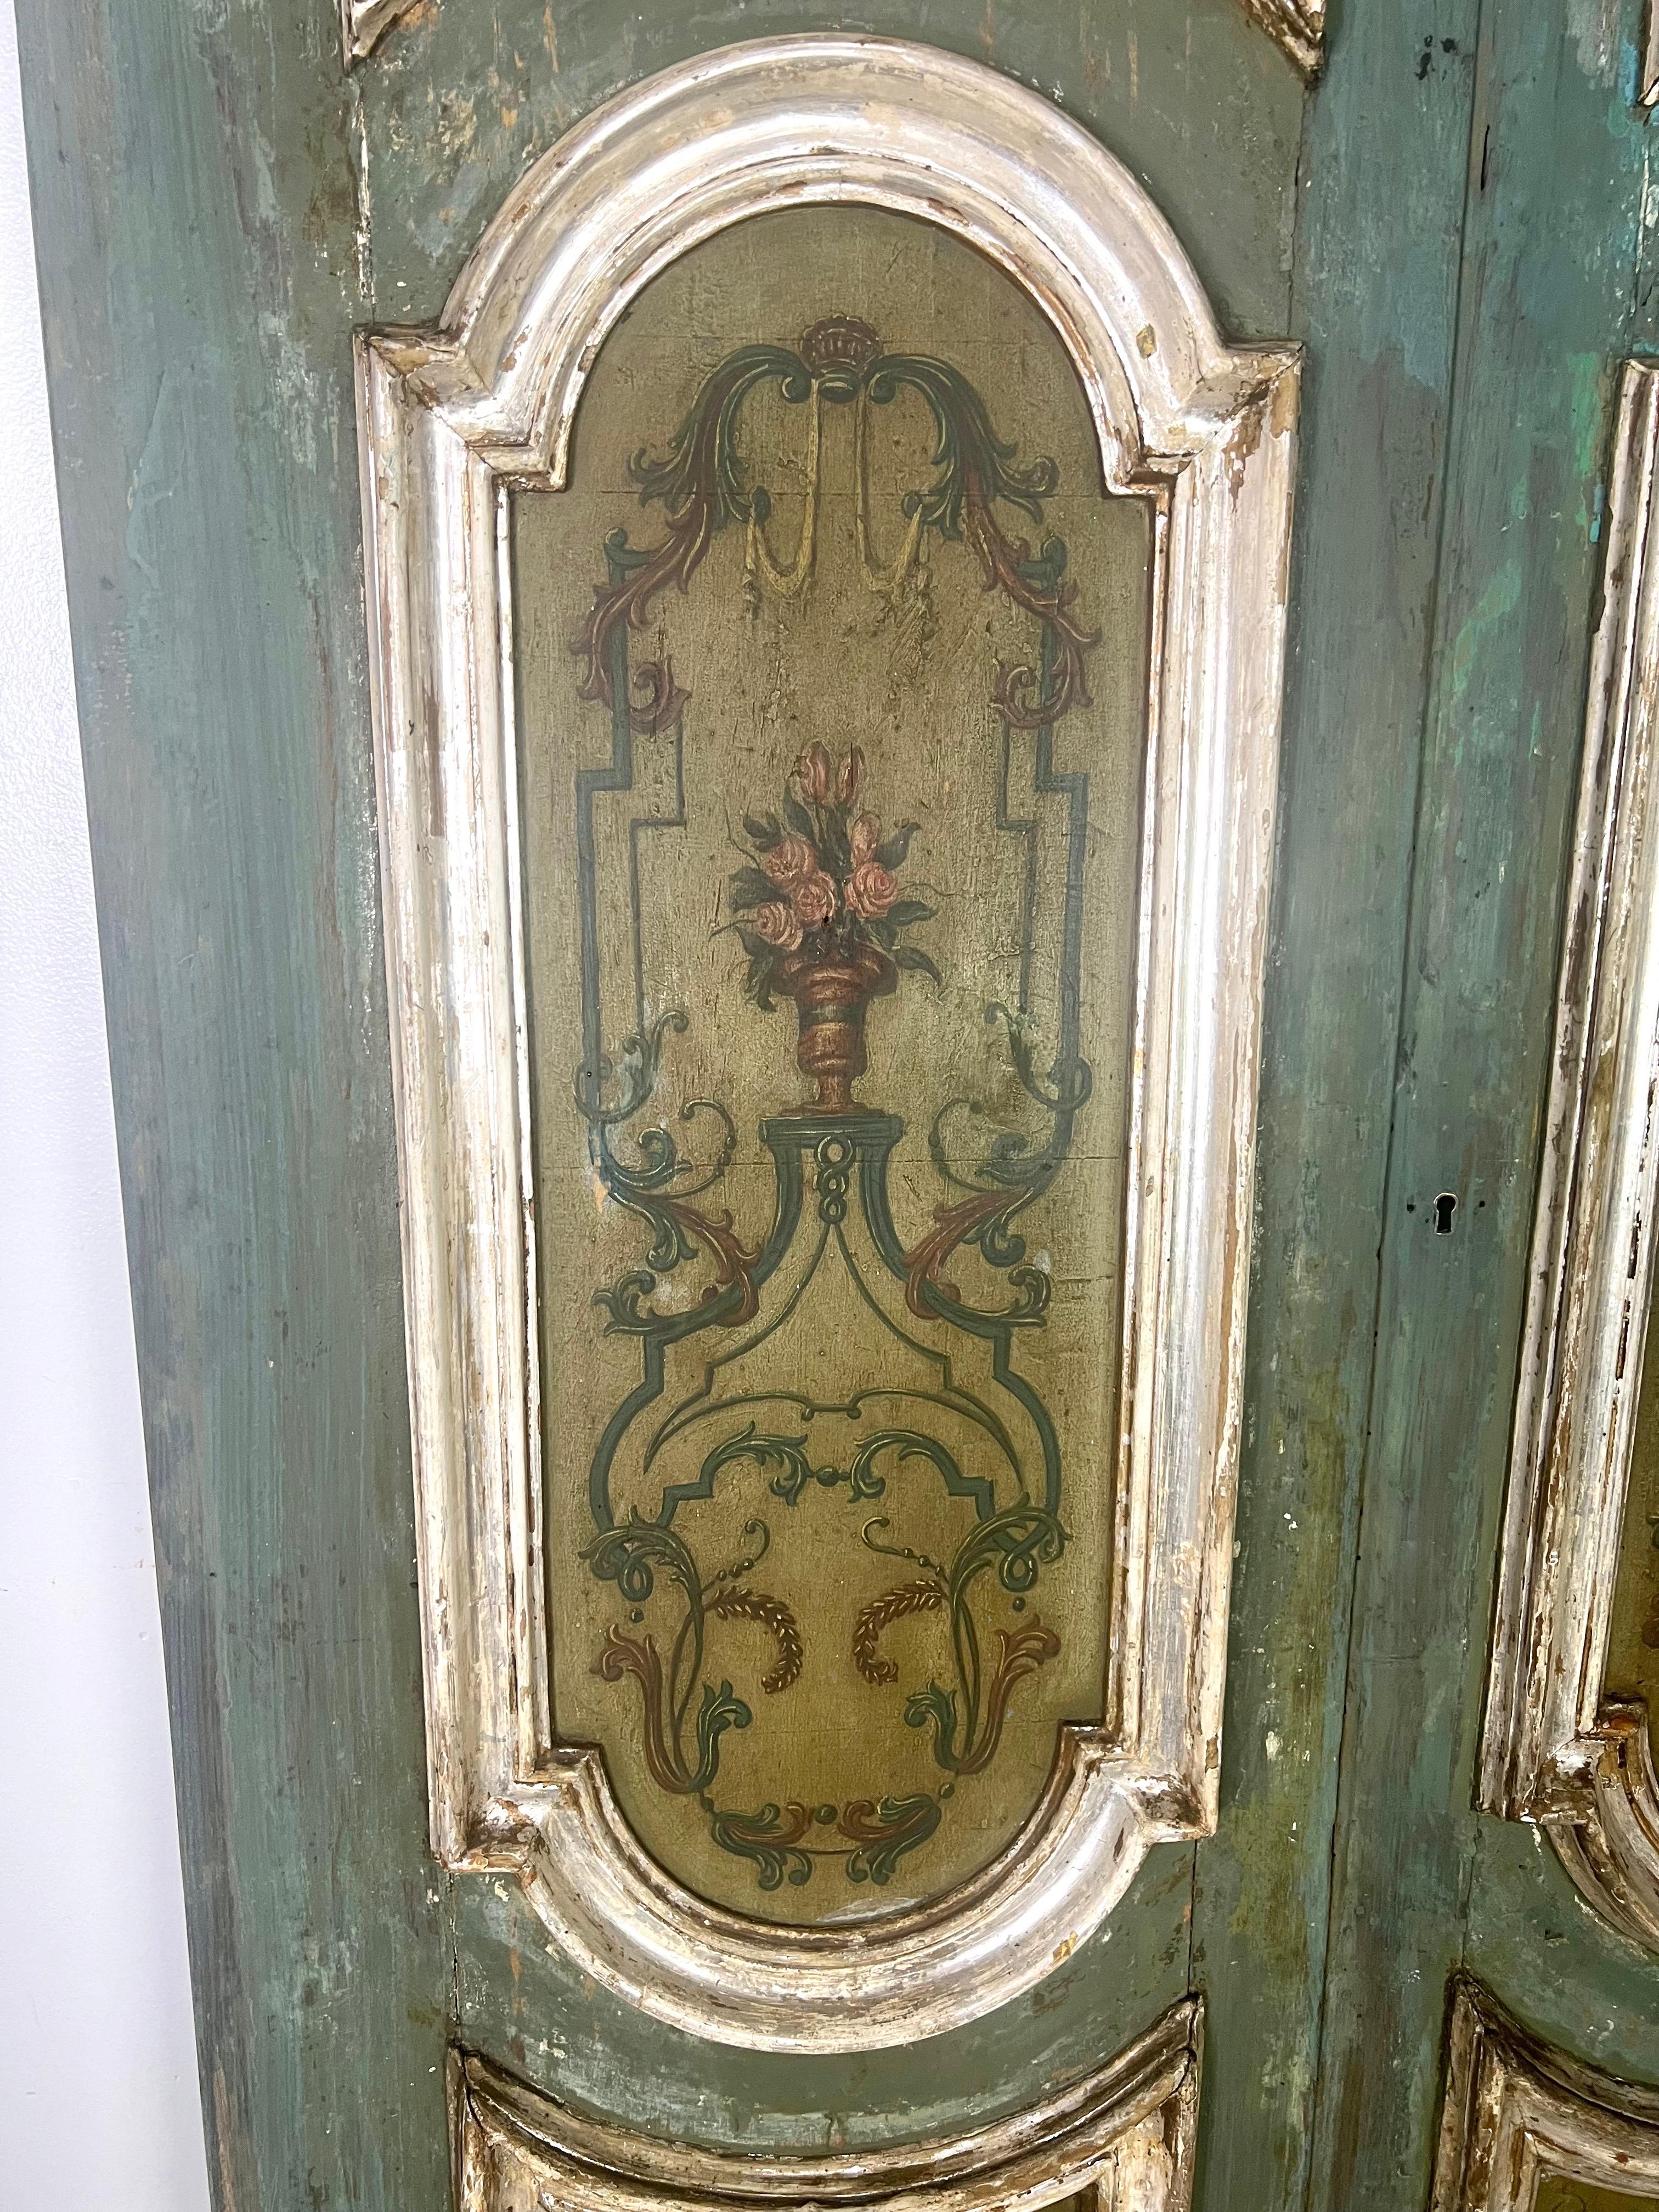 Pair of 19th Century Italian painted & silvered doors featuring a beautiful distressed turquoise finish with golden brown painted panels.  Each panel is ornately painted with floral motifs and framed in elegant silver gilt detailing.  They exhibit a